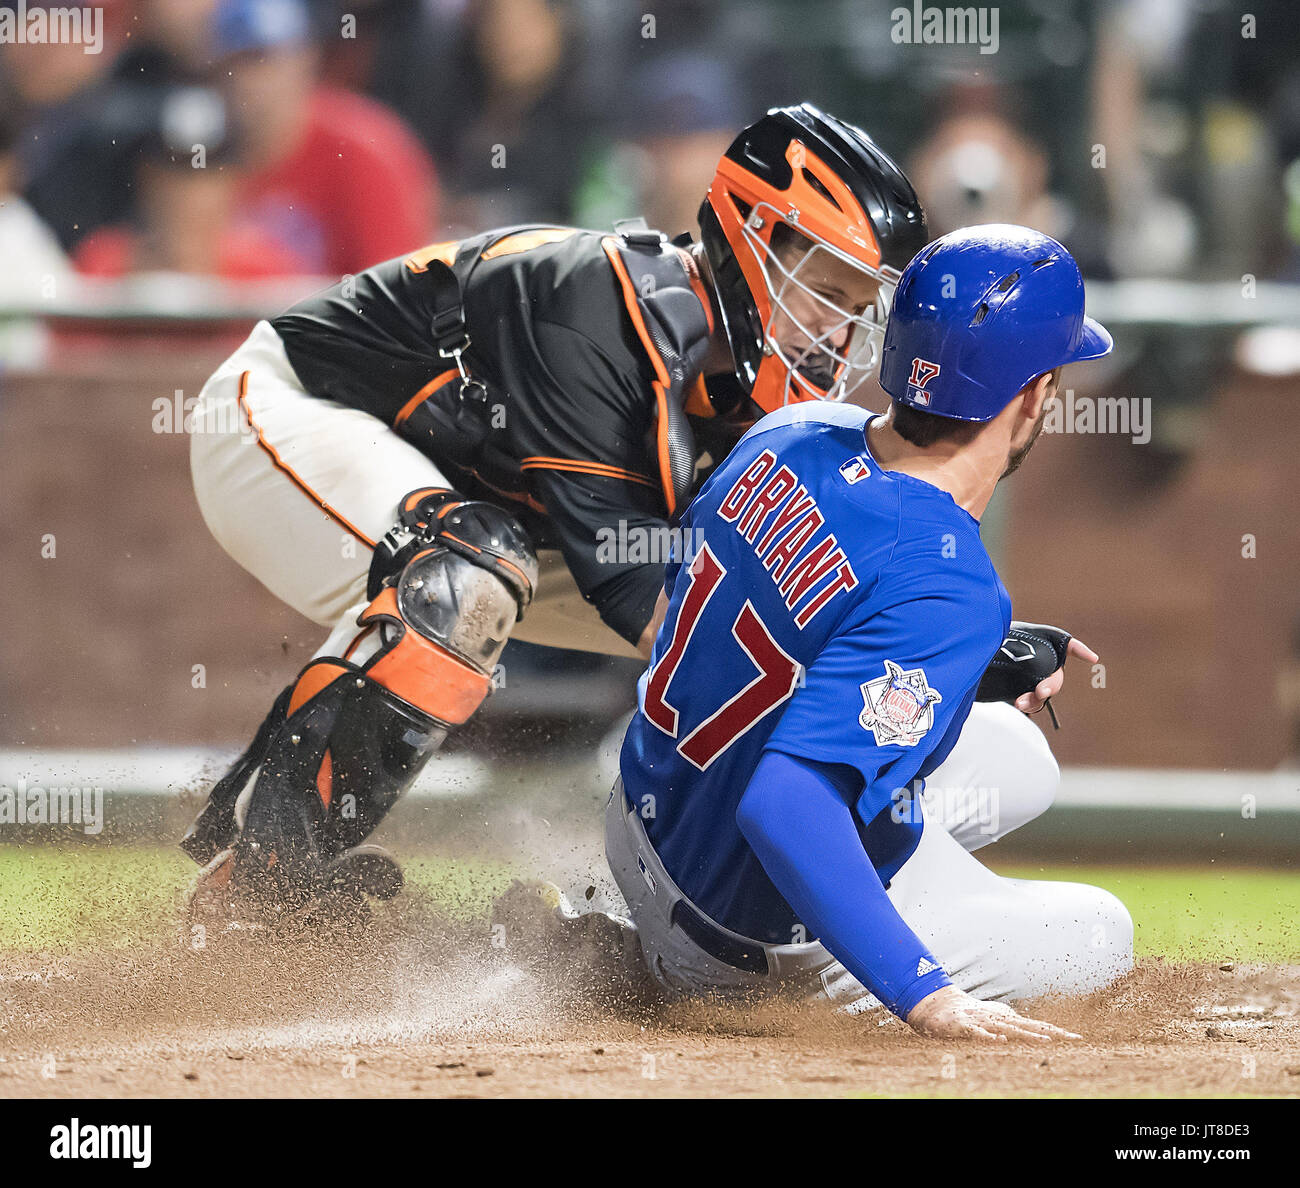 San Francisco, California, USA. 07th Aug, 2017. August 07, 2017: Chicago Cubs third baseman Kris Bryant (17) tagged out at home plate by Giants catcher Buster Posey (28) in the seventh inning, during a MLB game between the Chicago Cubs and the San Francisco Giants at AT&T Park in San Francisco, California. Valerie Shoaps/CSM Credit: Cal Sport Media/Alamy Live News Stock Photo